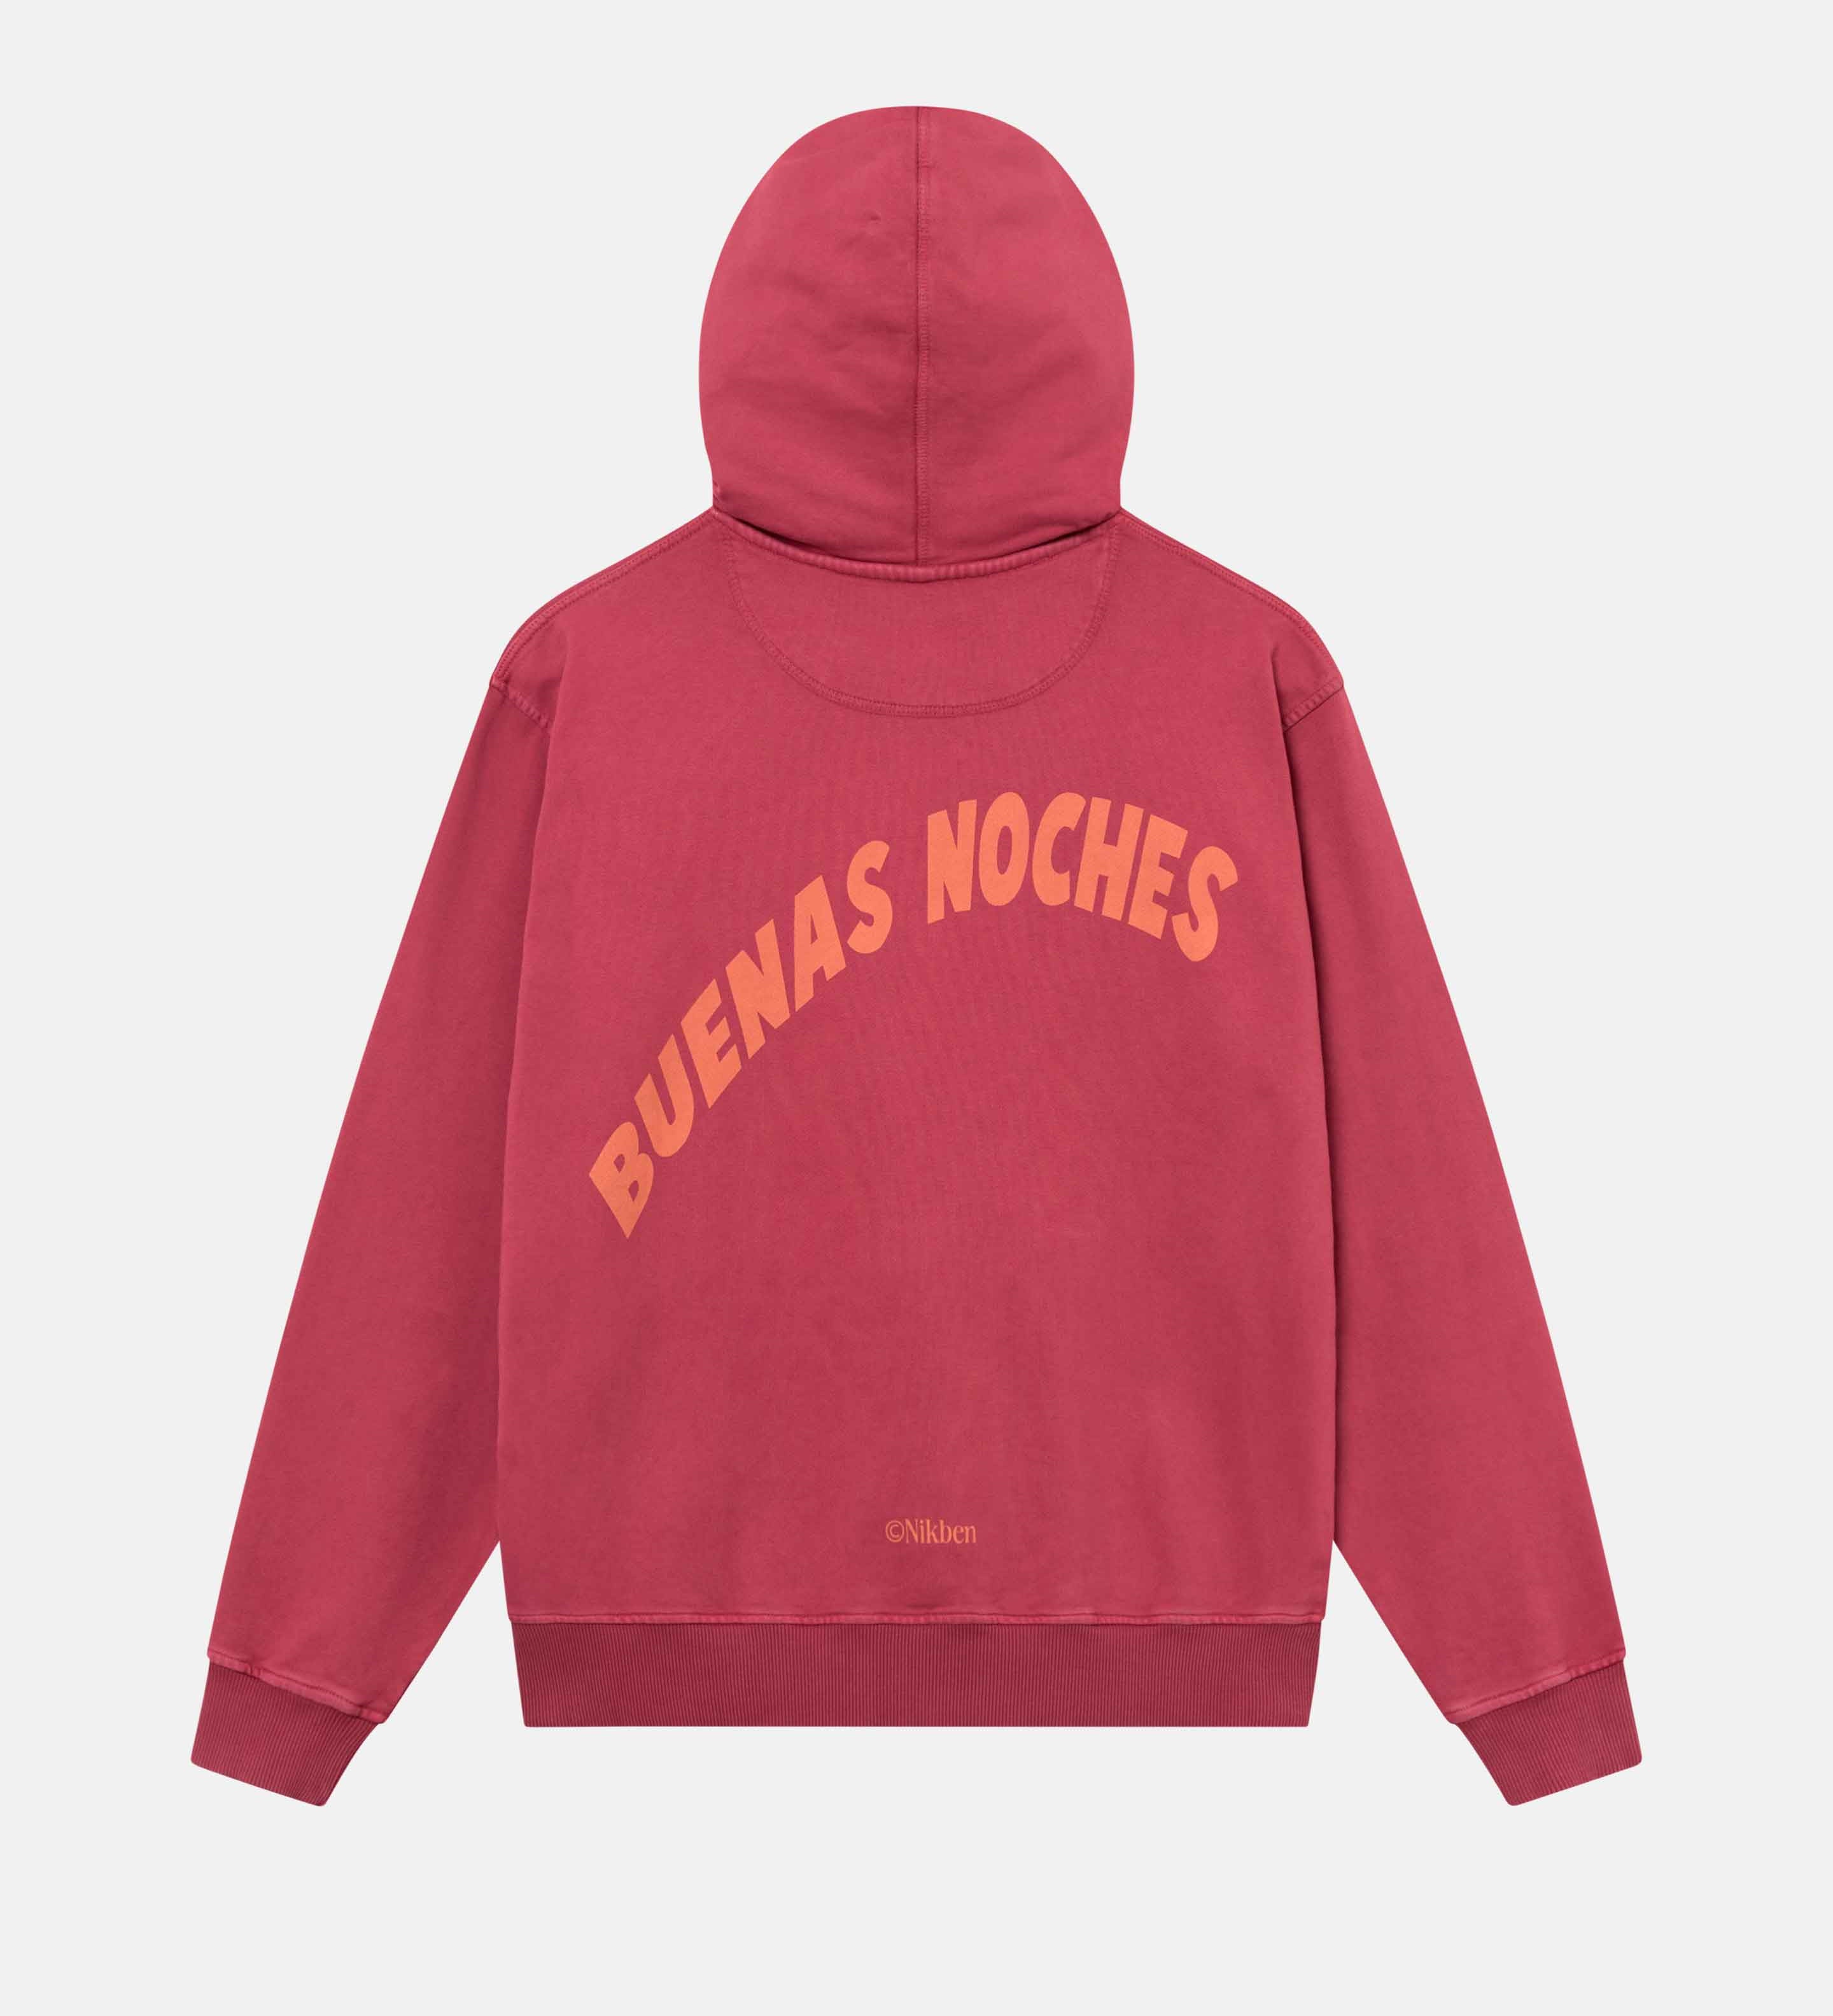 A burgundy hoodie with a large orange "buenas noches" back print